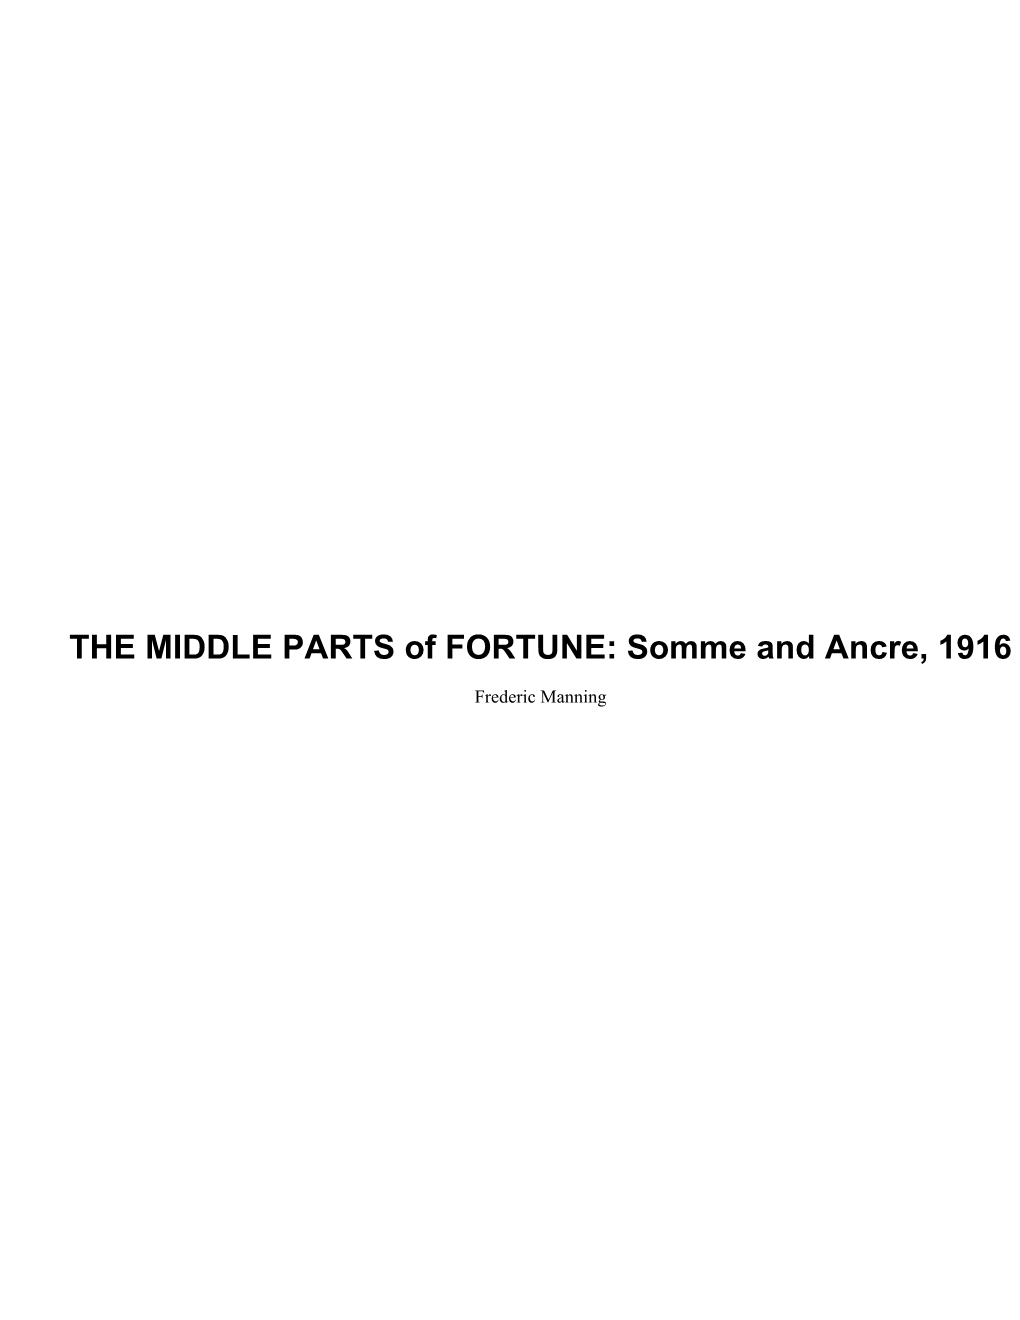 THE MIDDLE PARTS of FORTUNE: Somme and Ancre, 1916